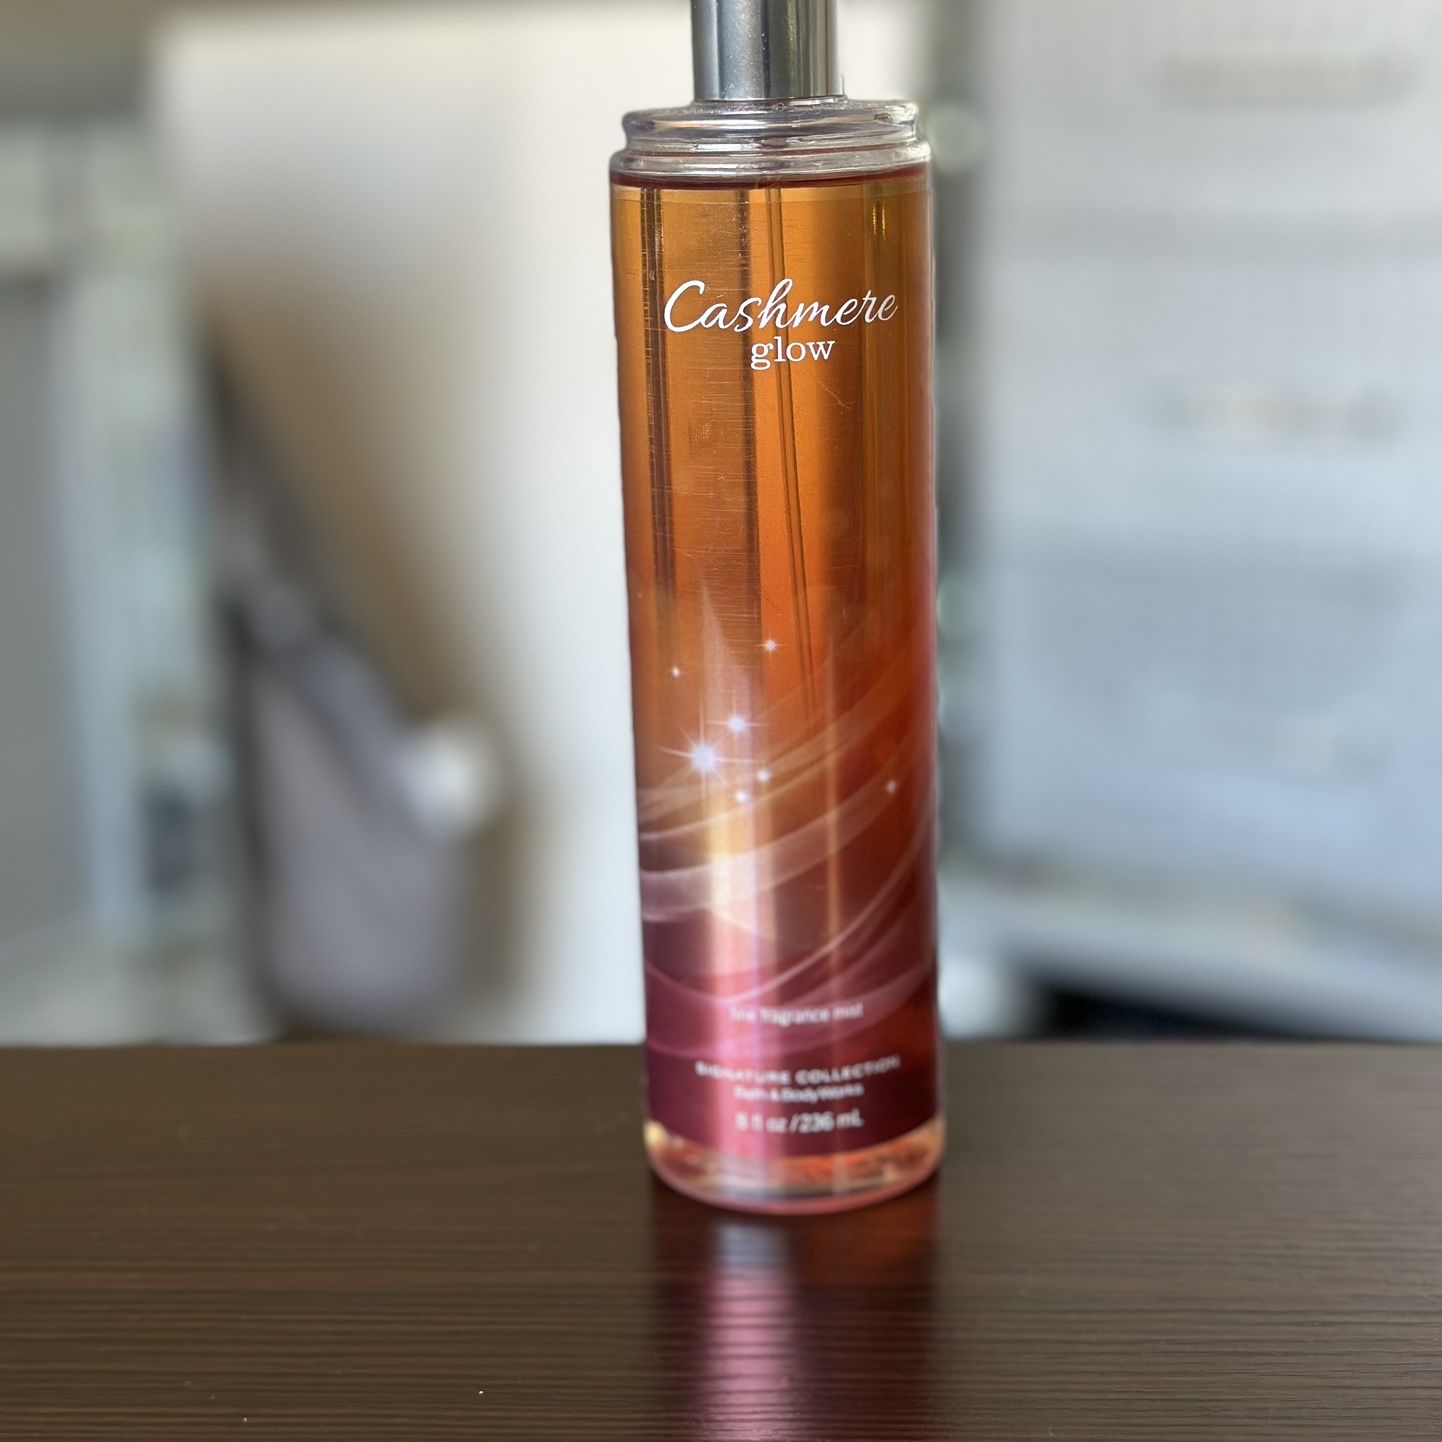 Cashmere Glow from Bath and Body Works 